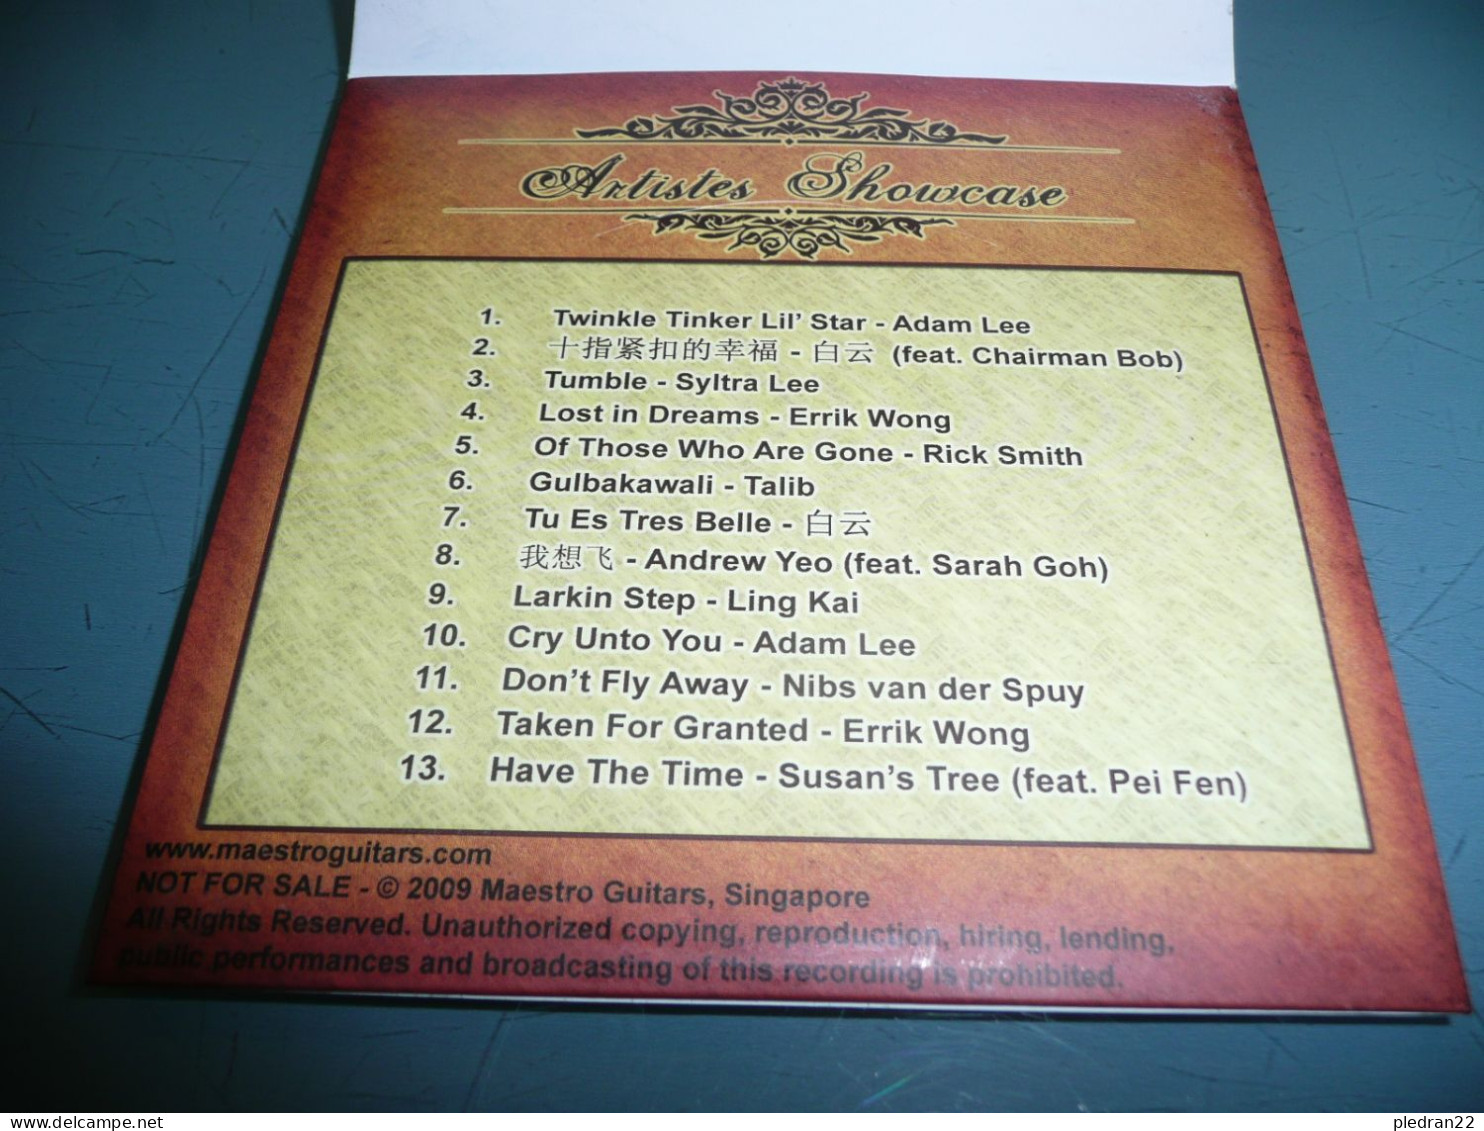 MAESTRO SINGAPORE HANDCRAFTED GUITARS ARTISTES SHOWCASE 2009 CD COMPILATION VOL. 2 - Hit-Compilations